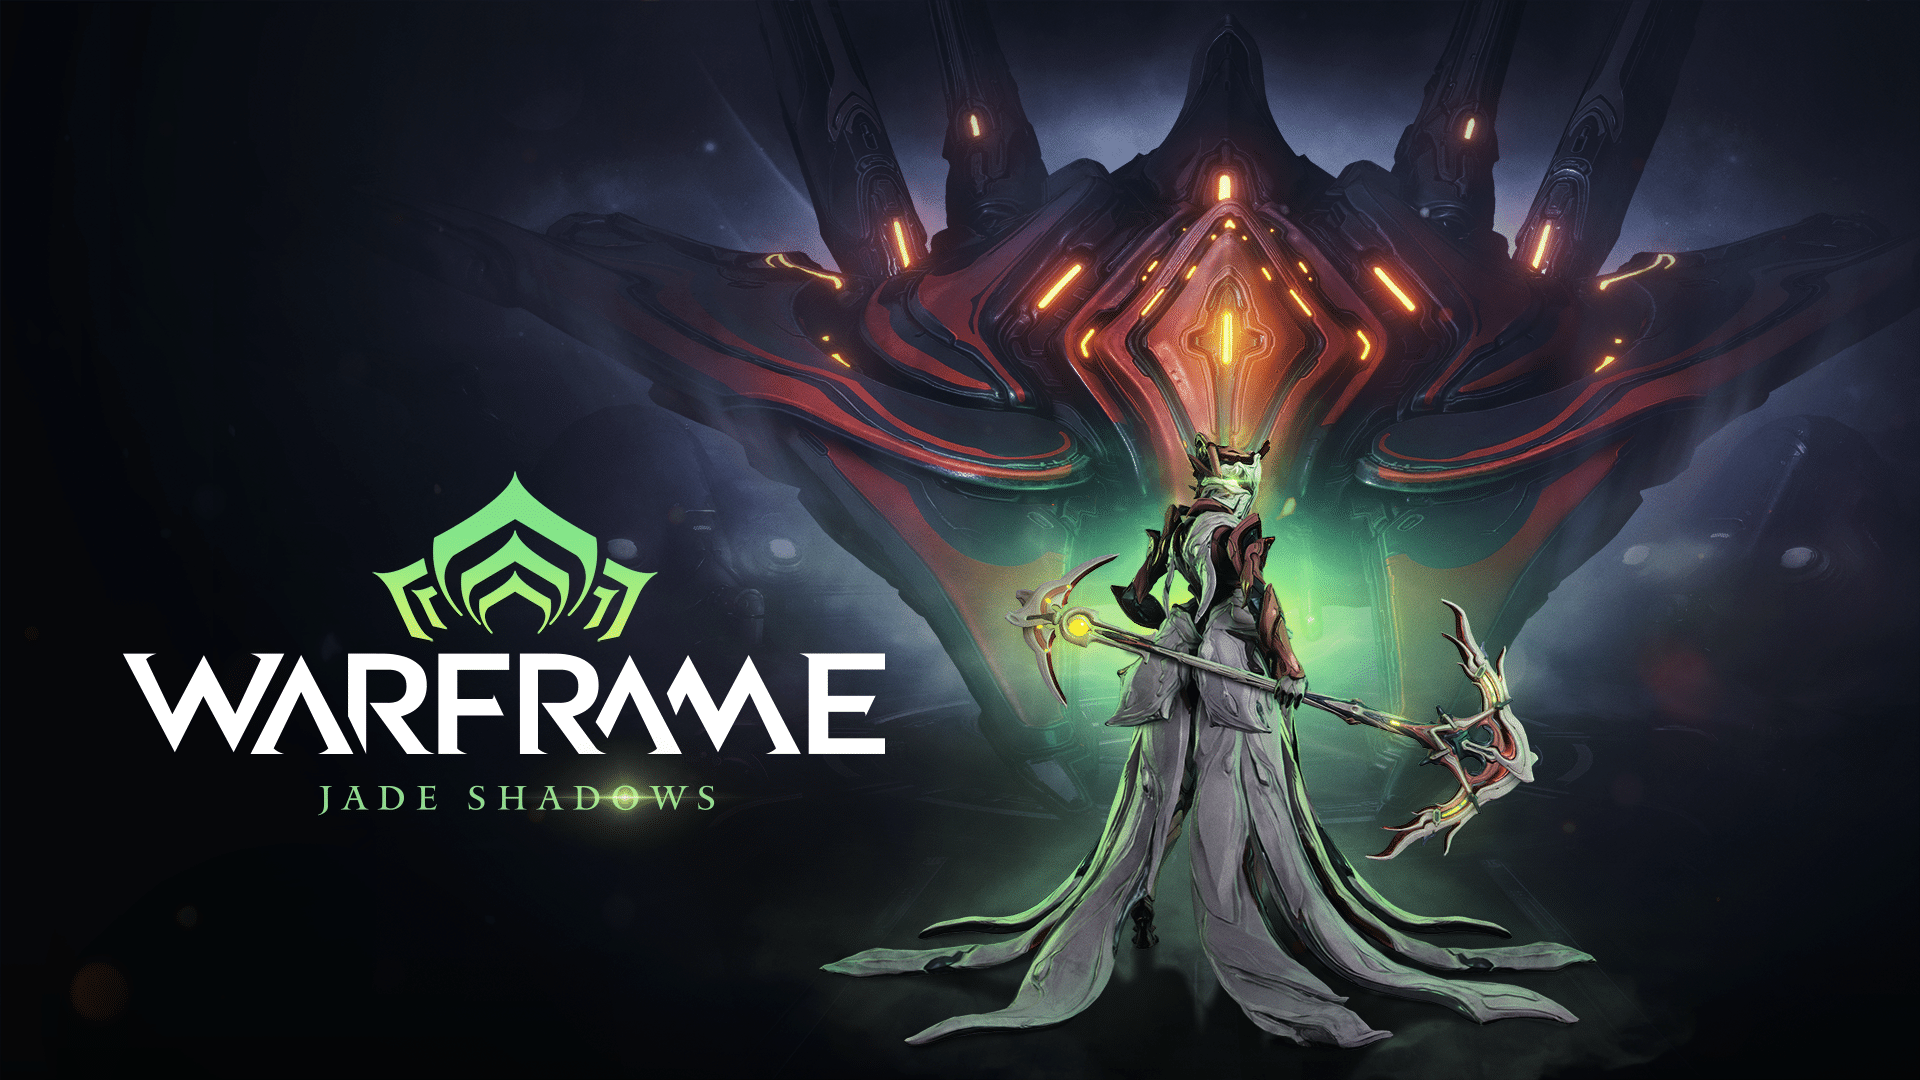 Warframe’s “Jade Shadows” Single-Player Narrative Quest Out in June